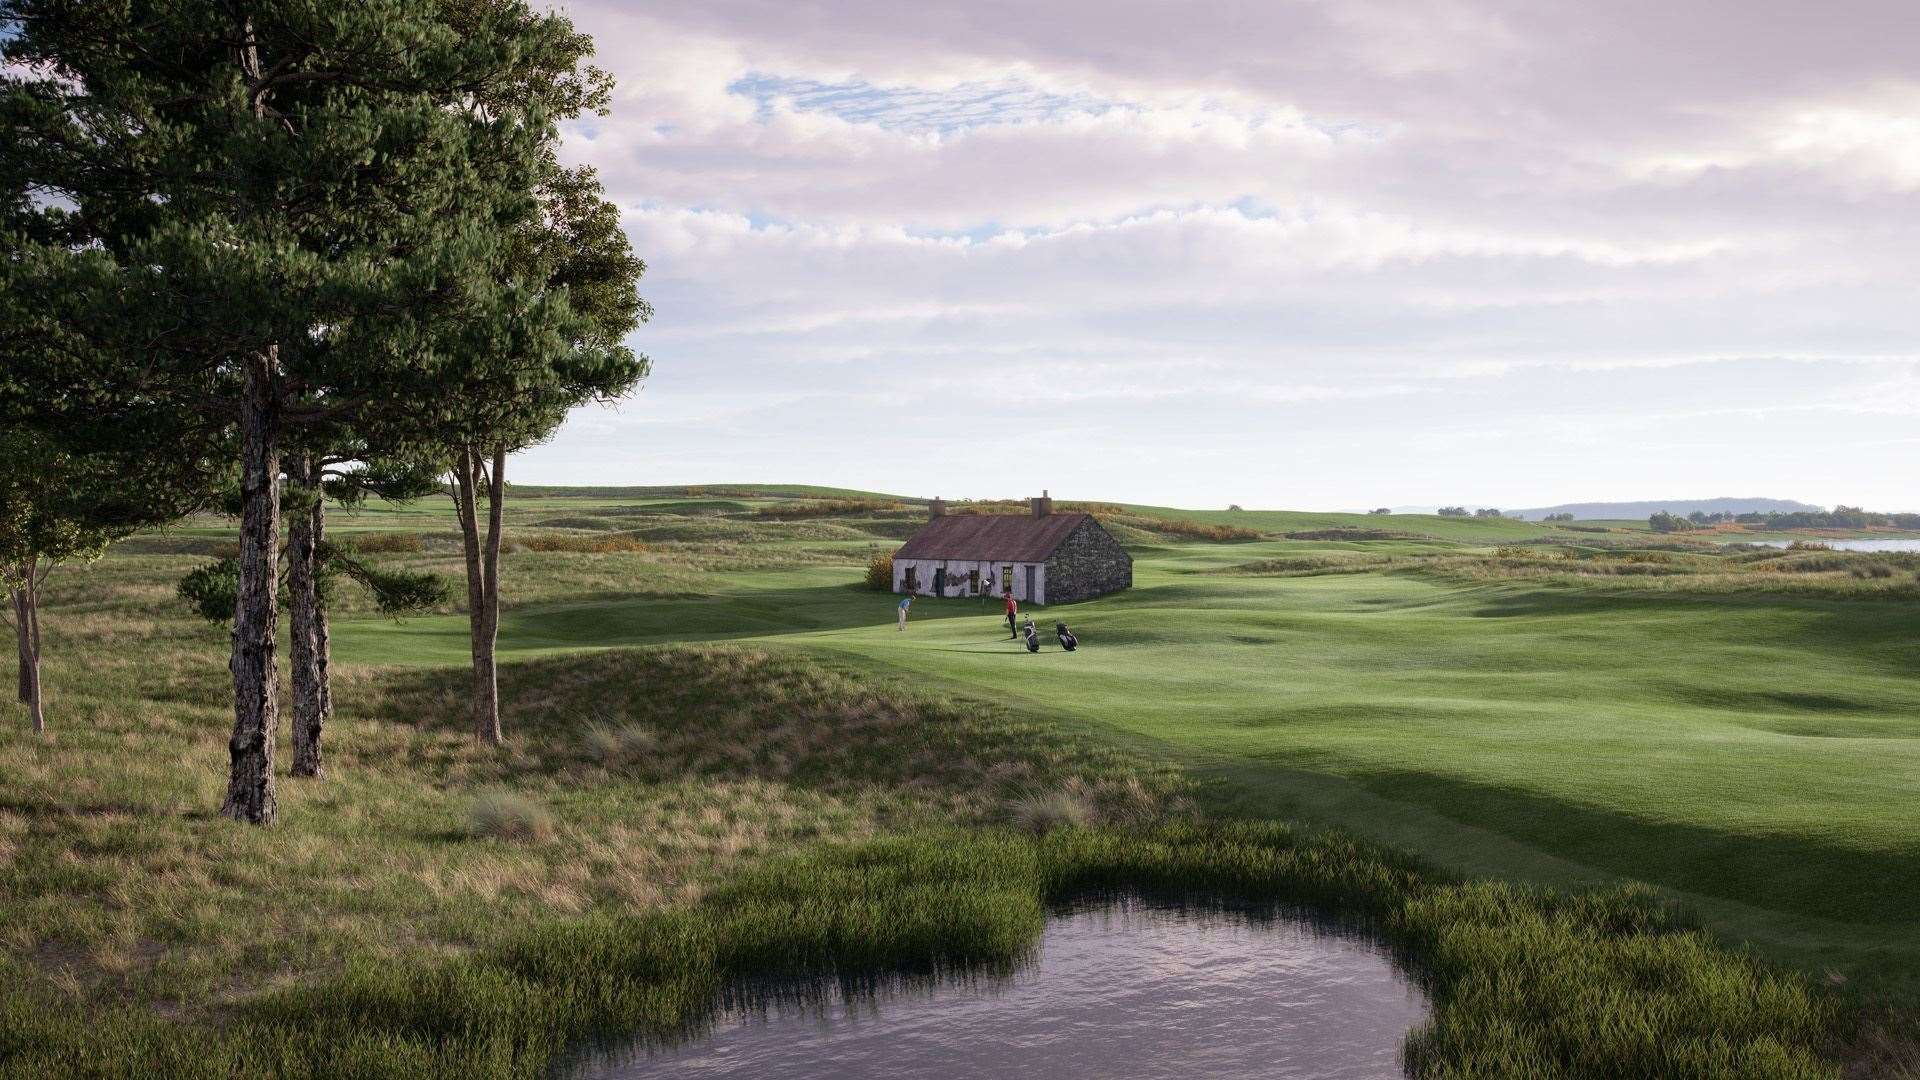 An artist's impression of the fifth hole at Cabot Highlands' new Old Petty course. Rendered by: Harris Kalinka, Picture: Cabot Highlands website